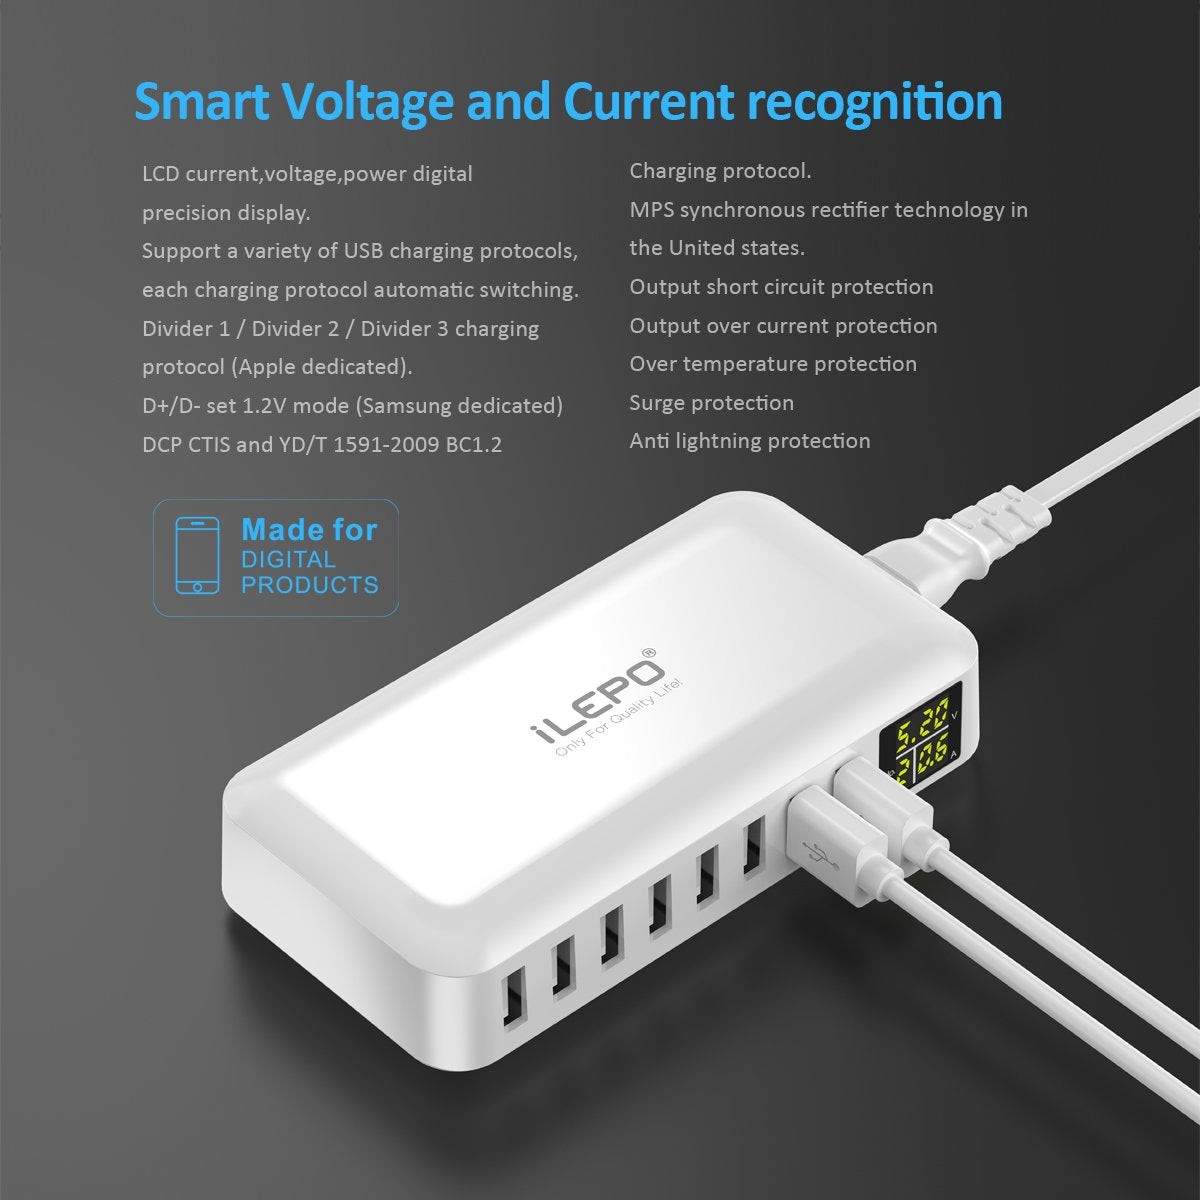 iLepo Smart HUB USB Charging 8-Port Wall Charger with LCD Display 40W MAX 8A Desktop USB Multi-Port Charging Station For iPhone Tablets iPad Samsung HTC [2 Years Warranty]